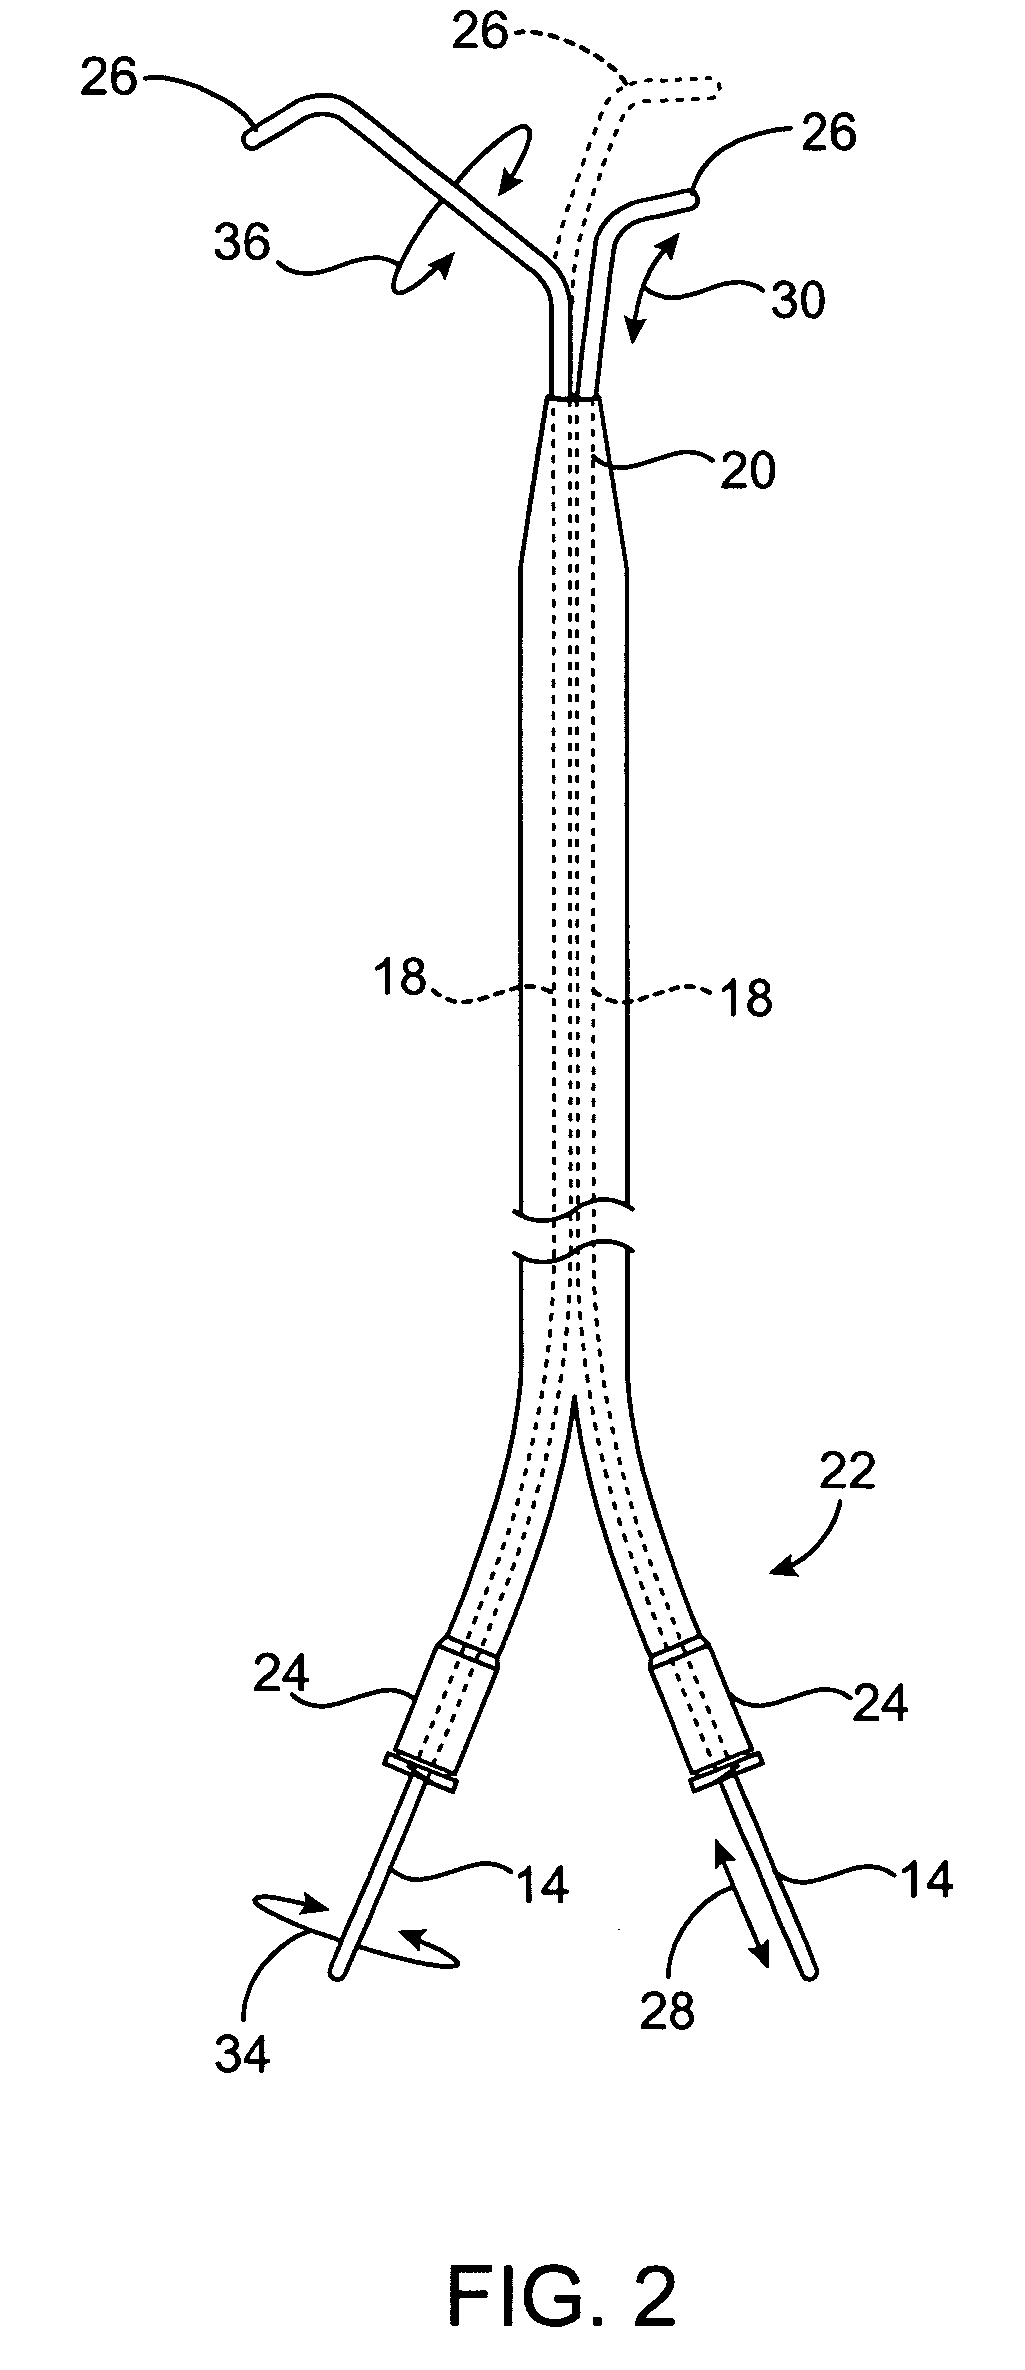 Systems and methods for bi-lateral guidewire cannulation of branched body lumens